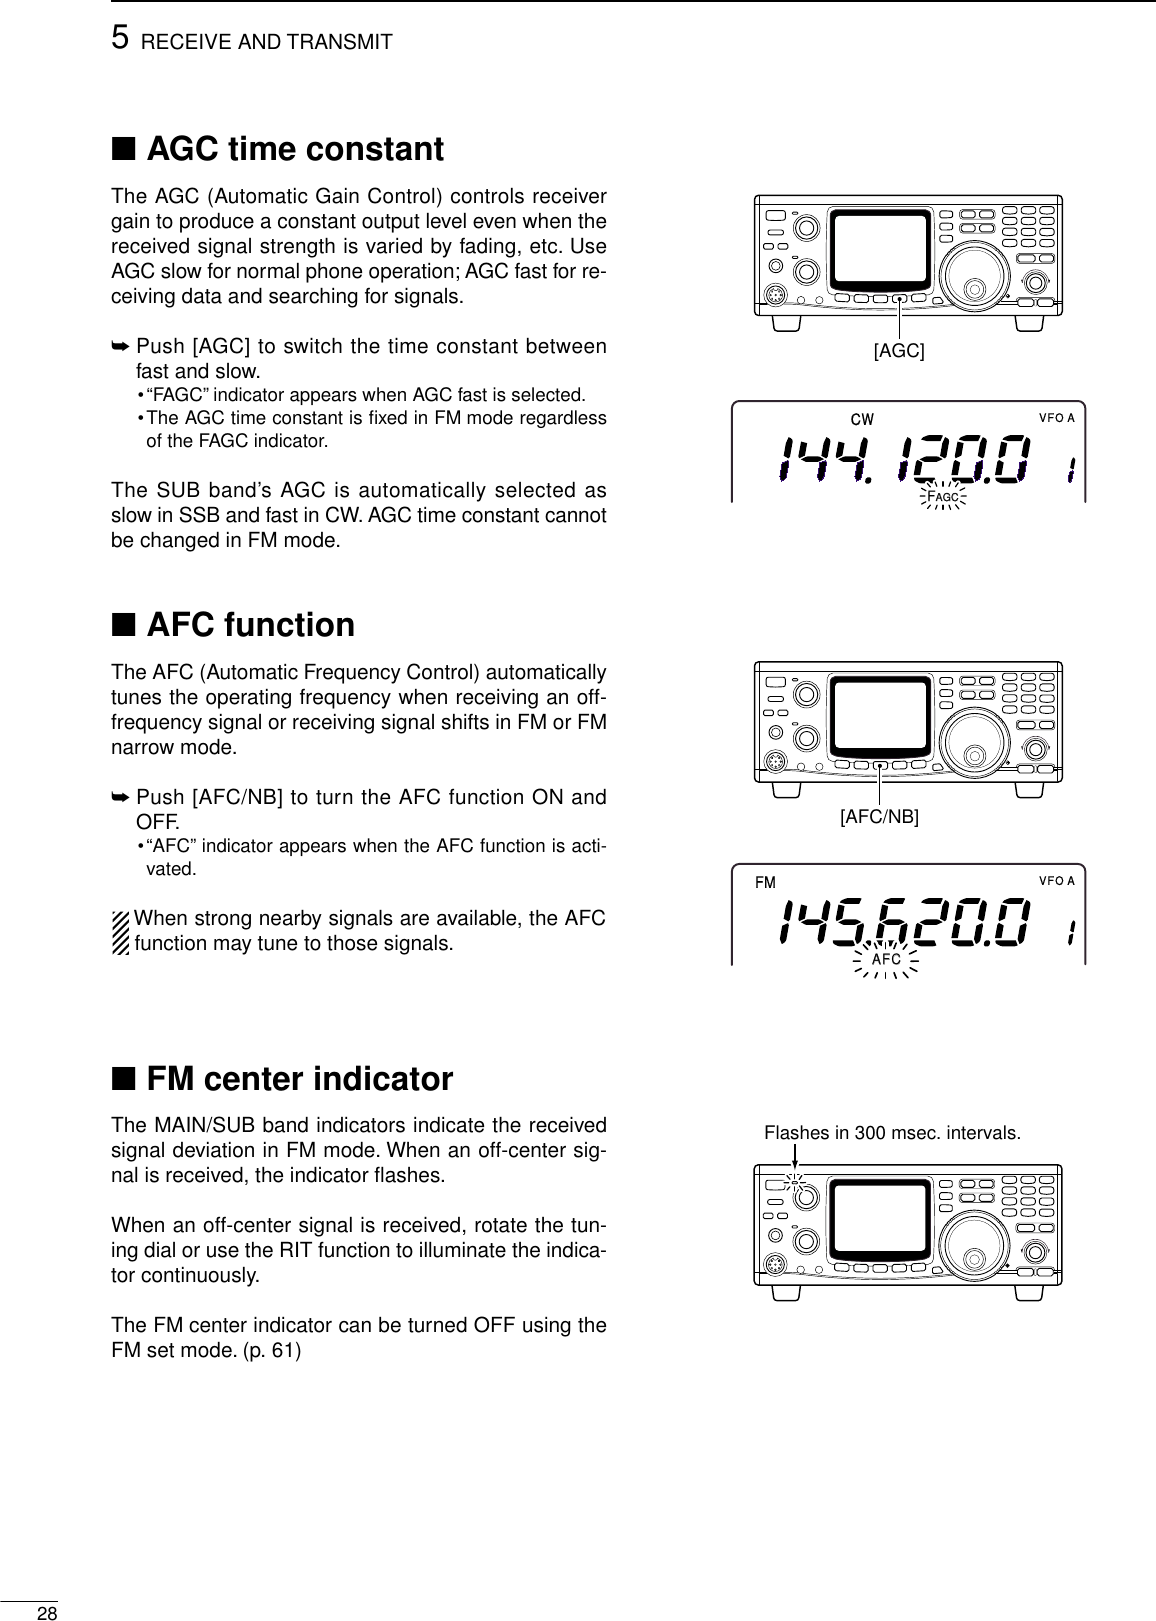 285RECEIVE AND TRANSMIT■AGC time constantThe AGC (Automatic Gain Control) controls receivergain to produce a constant output level even when thereceived signal strength is varied by fading, etc. UseAGC slow for normal phone operation; AGC fast for re-ceiving data and searching for signals.➥Push [AGC] to switch the time constant betweenfast and slow.•“FAGC”indicator appears when AGC fast is selected.•The AGC time constant is ﬁxed in FM mode regardlessof the FAGC indicator.The SUB band’s AGC is automatically selected asslow in SSB and fast in CW. AGC time constant cannotbe changed in FM mode.■AFC functionThe AFC (Automatic Frequency Control) automaticallytunes the operating frequency when receiving an off-frequency signal or receiving signal shifts in FM or FMnarrow mode.➥Push [AFC/NB] to turn the AFC function ON andOFF.•“AFC”indicator appears when the AFC function is acti-vated.When strong nearby signals are available, the AFCfunction may tune to those signals.■FM center indicatorThe MAIN/SUB band indicators indicate the receivedsignal deviation in FM mode. When an off-center sig-nal is received, the indicator ﬂashes.When an off-center signal is received, rotate the tun-ing dial or use the RIT function to illuminate the indica-tor continuously.The FM center indicator can be turned OFF using theFM set mode. (p. 61)[AGC]CWVFO AFAGCAGC[AFC/NB]FMVFO AAFCAFCFlashes in 300 msec. intervals.